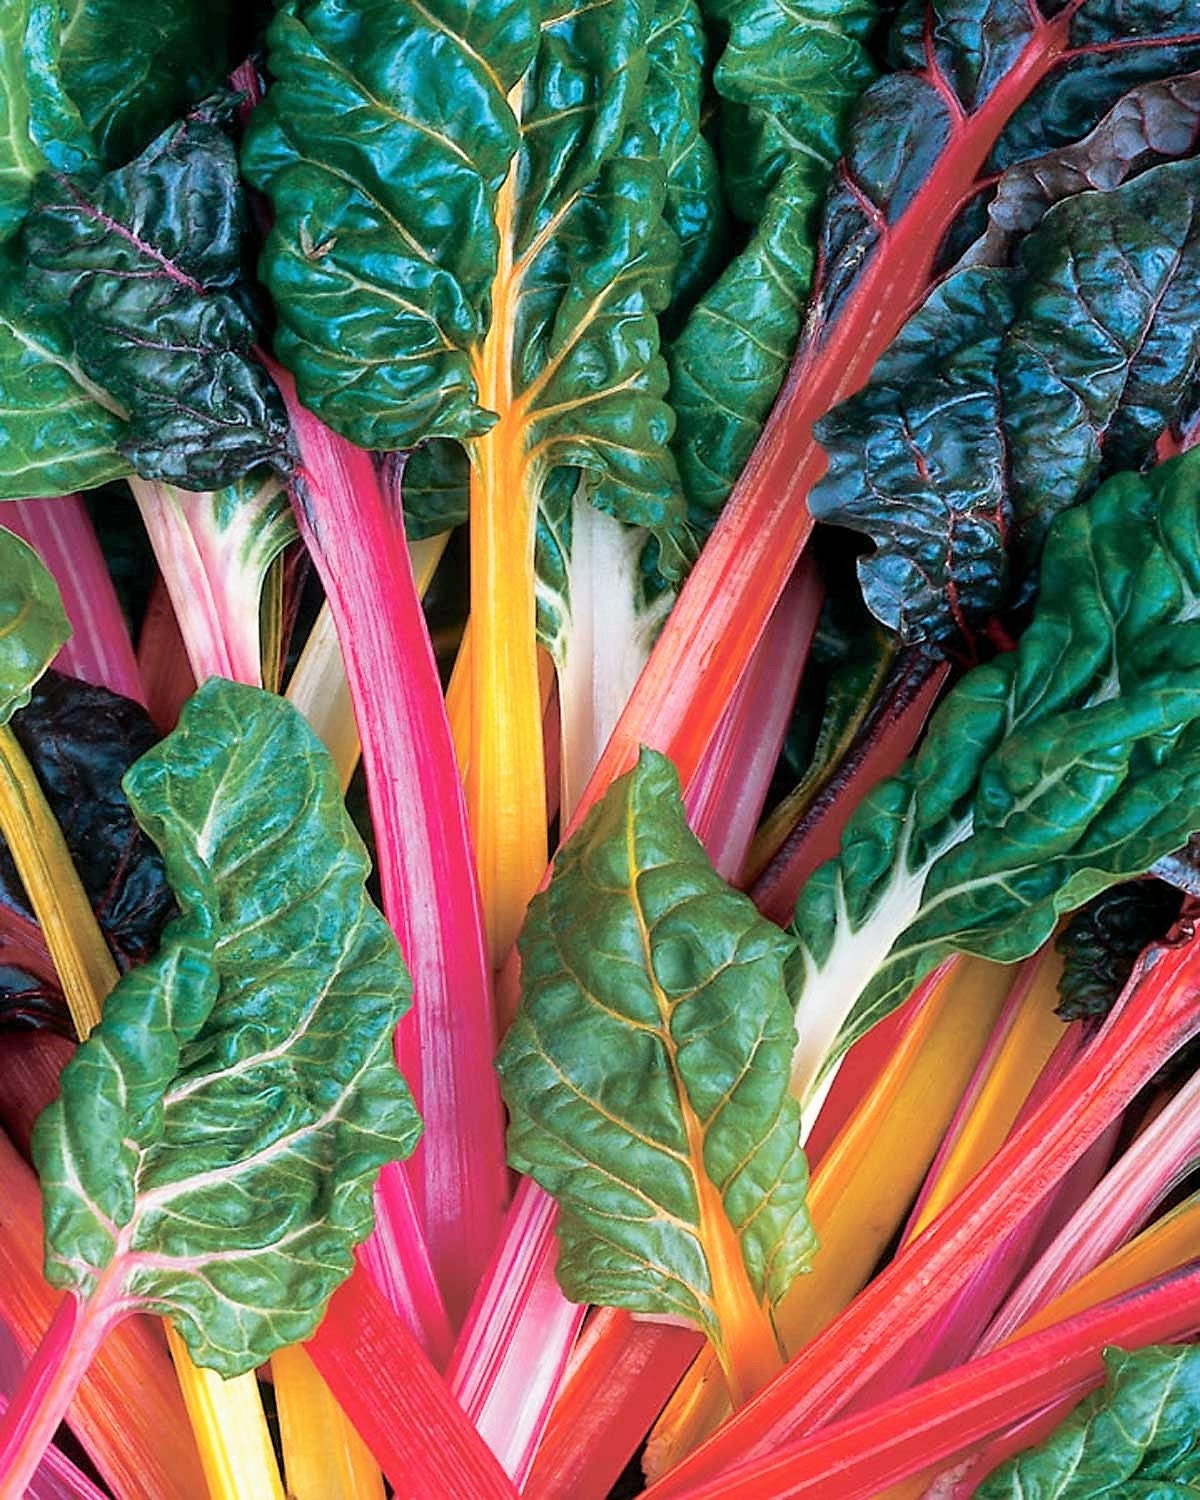 150 MIXED Colors Northern Lights SWISS CHARD (Perpetual Spinach) Beta Vulgaris Cicla Vegetable Seeds